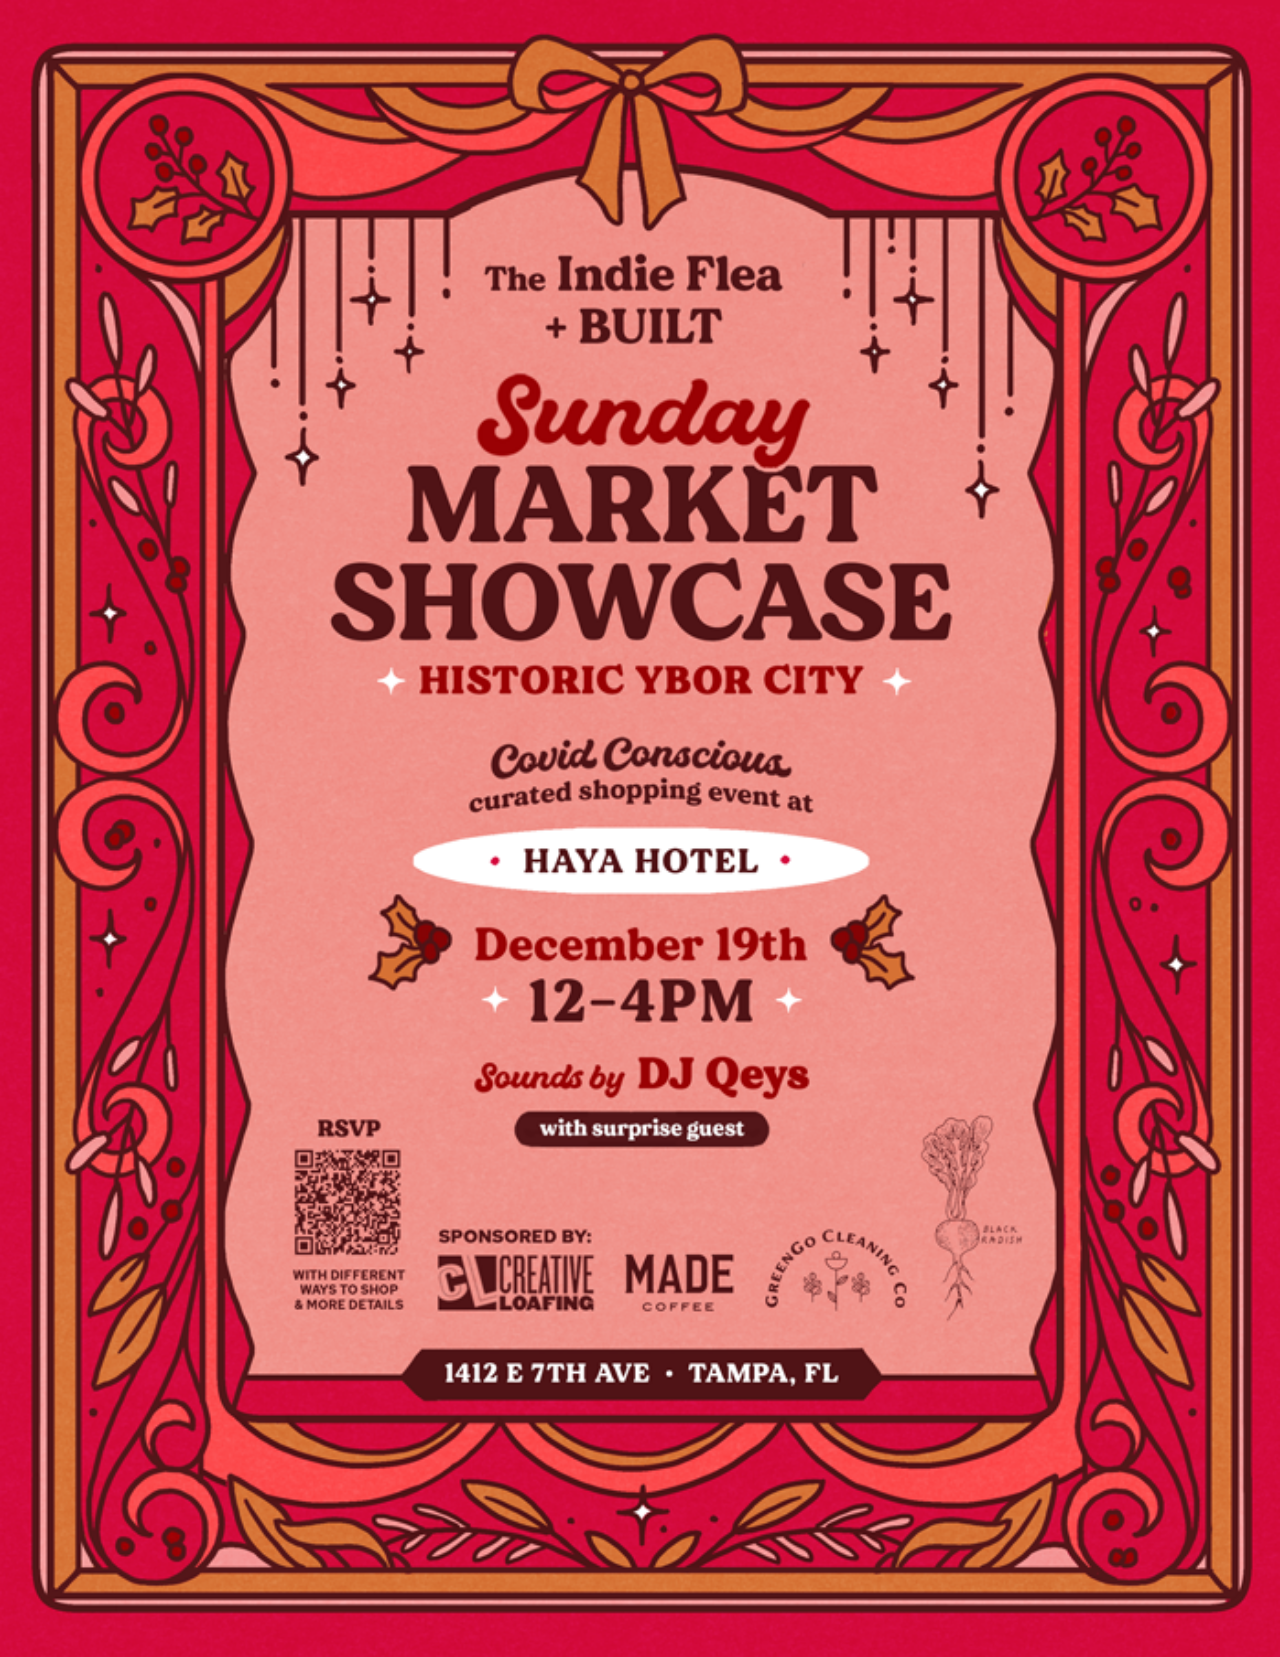 Sunday Market Showcase Flyer in Red in historic Ybor City near our hotel in Tampa, FL